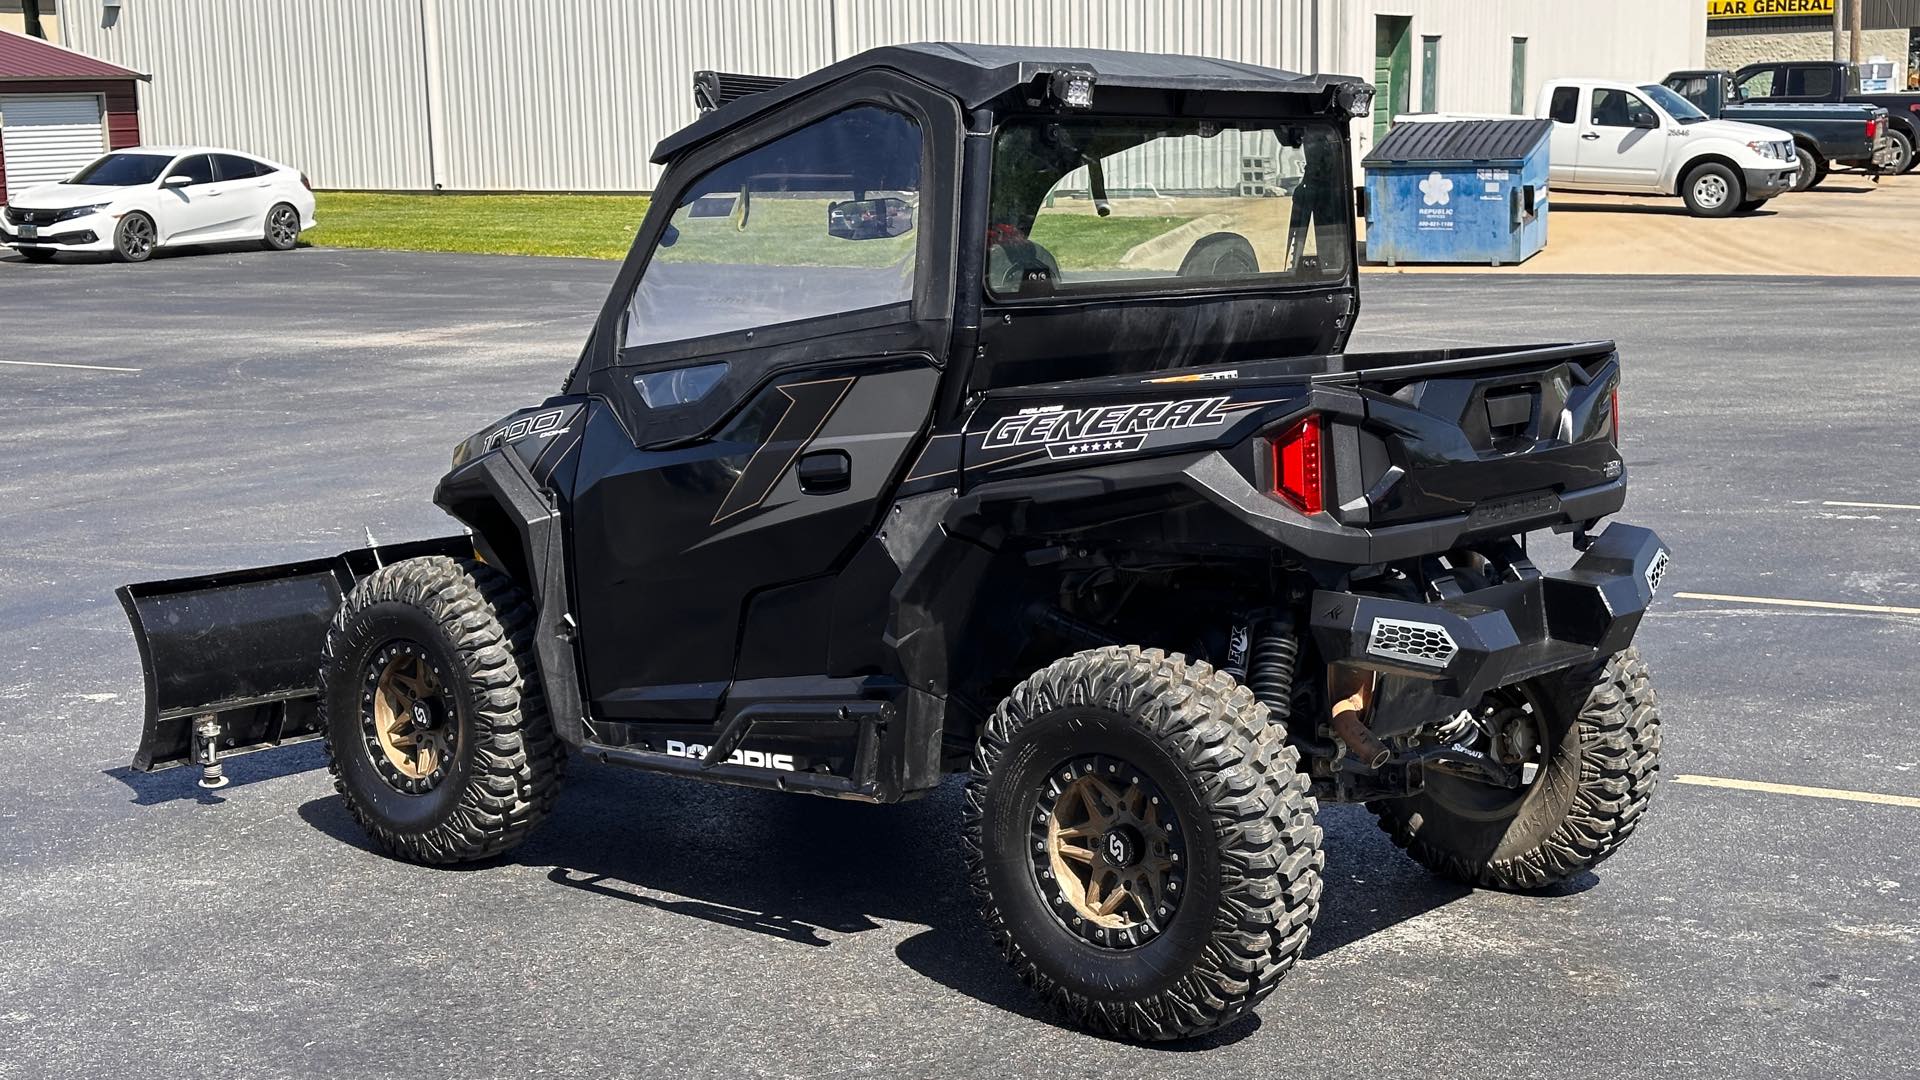 2019 Polaris GENERAL 1000 EPS Ride Command Edition at ATVs and More